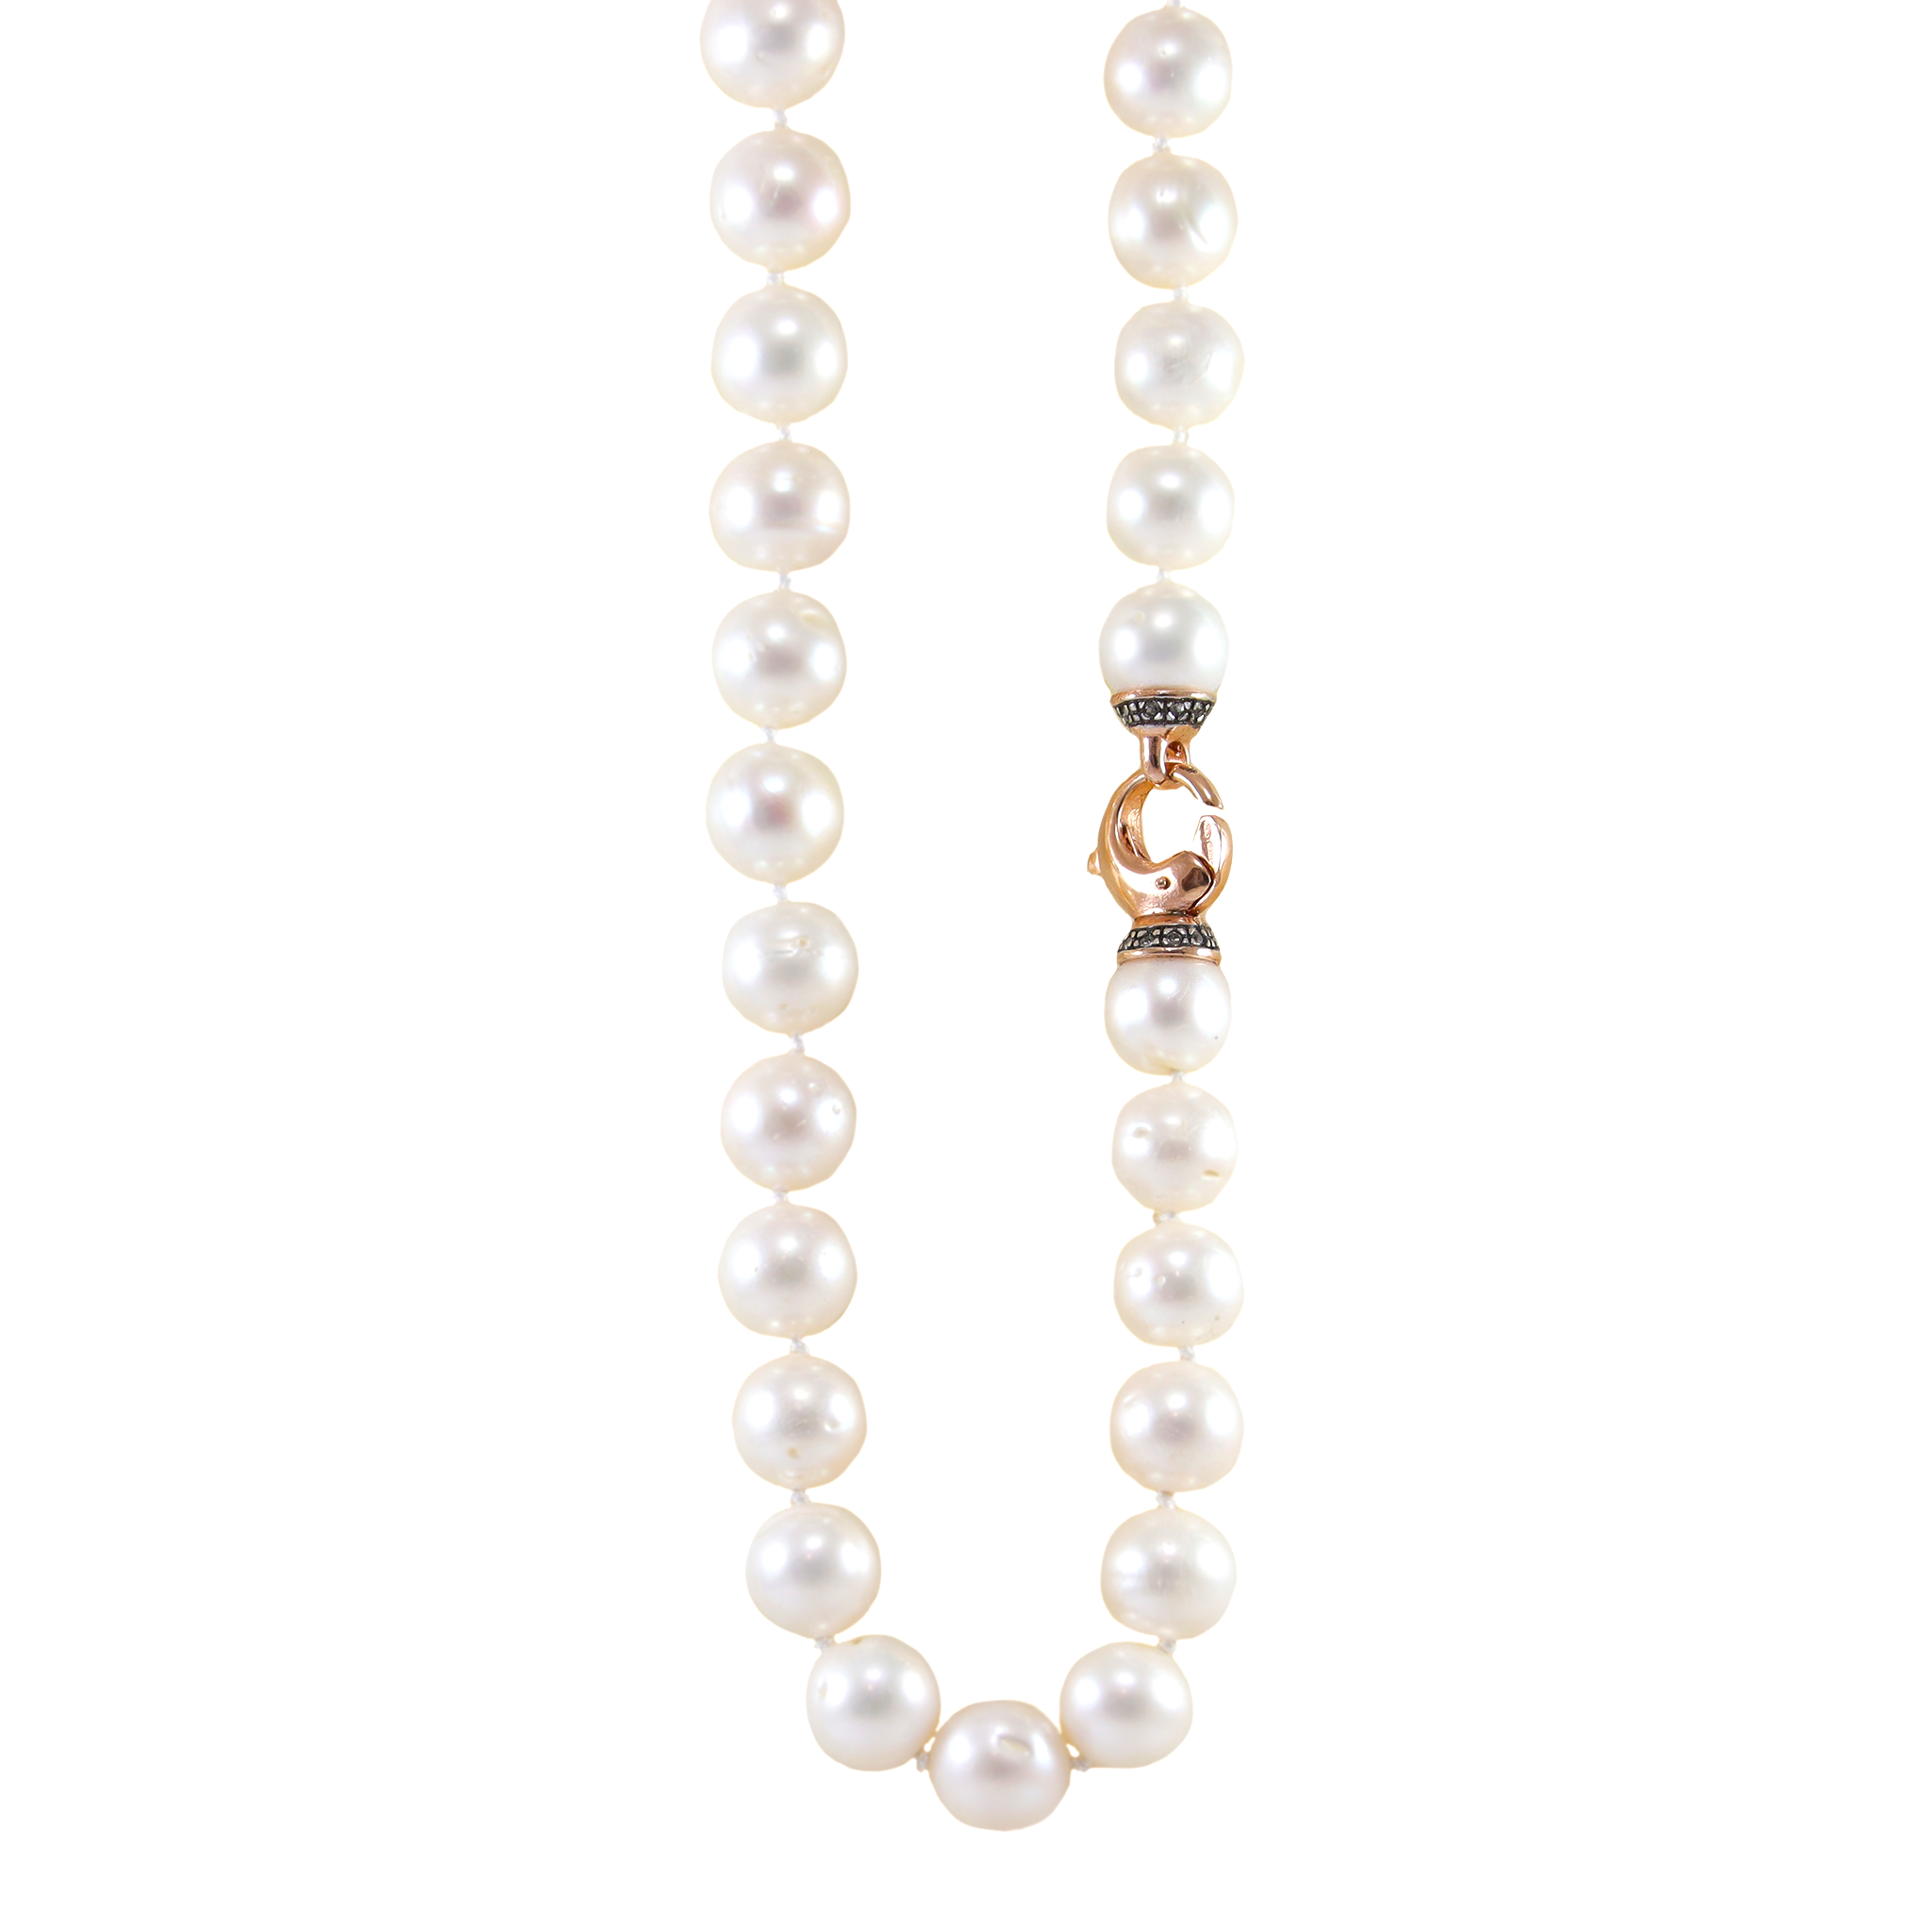 12-15mm Graduated White Pearl Necklace  19”+ Clasp